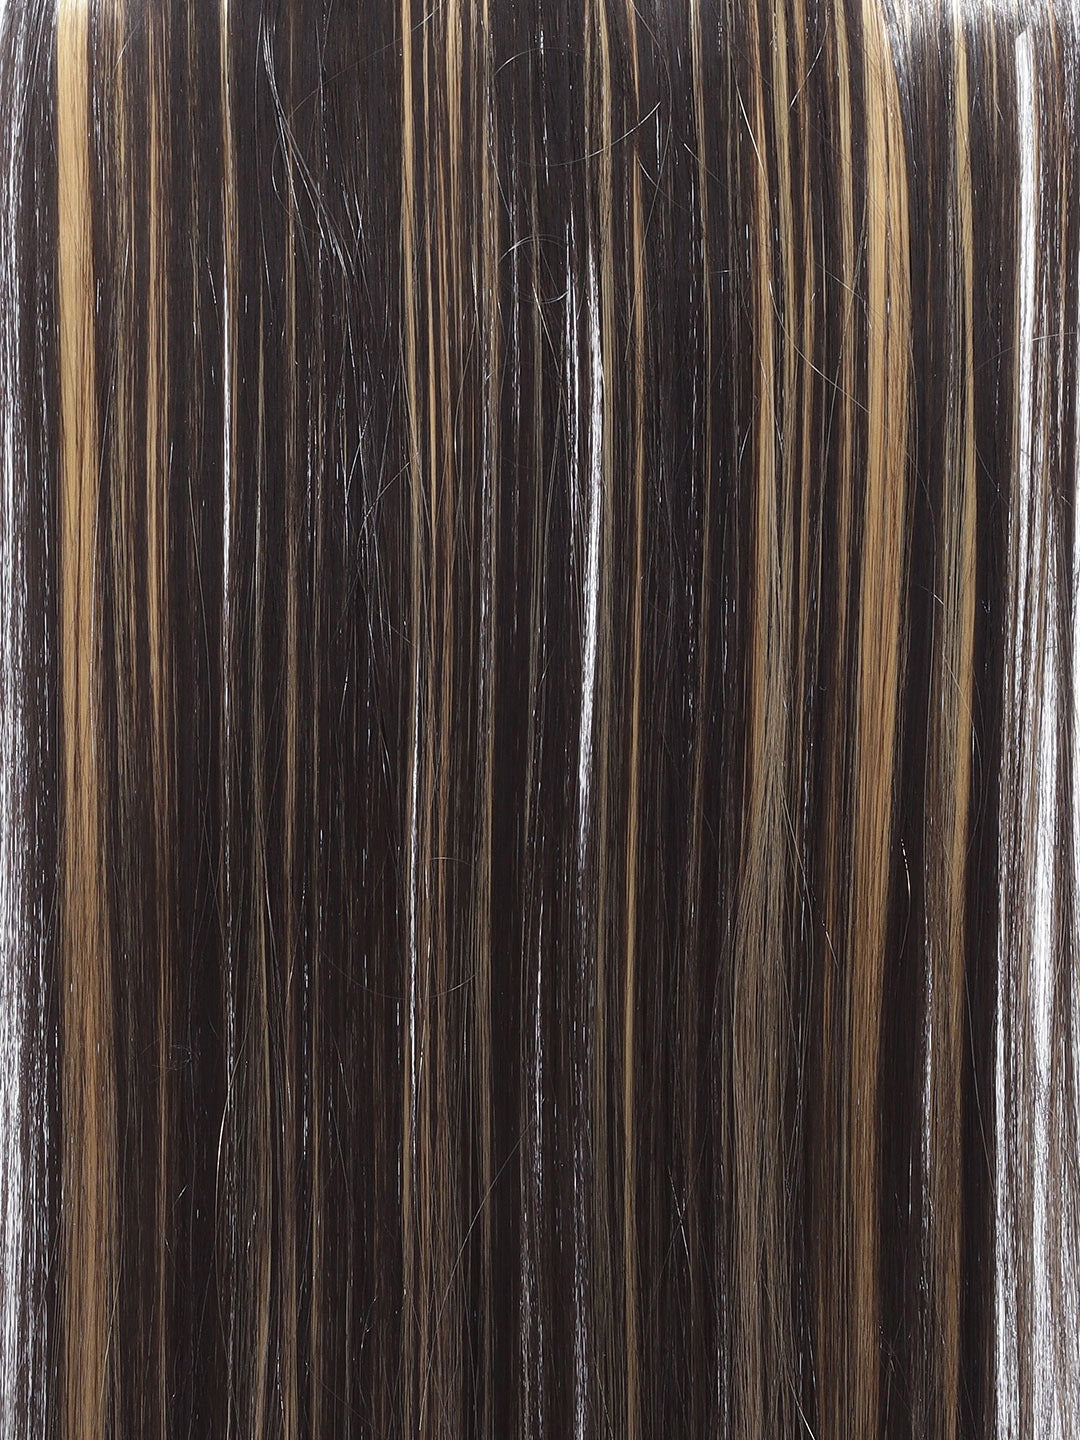 Blueberry golden and brown Straight Hair Extension with 5 clips